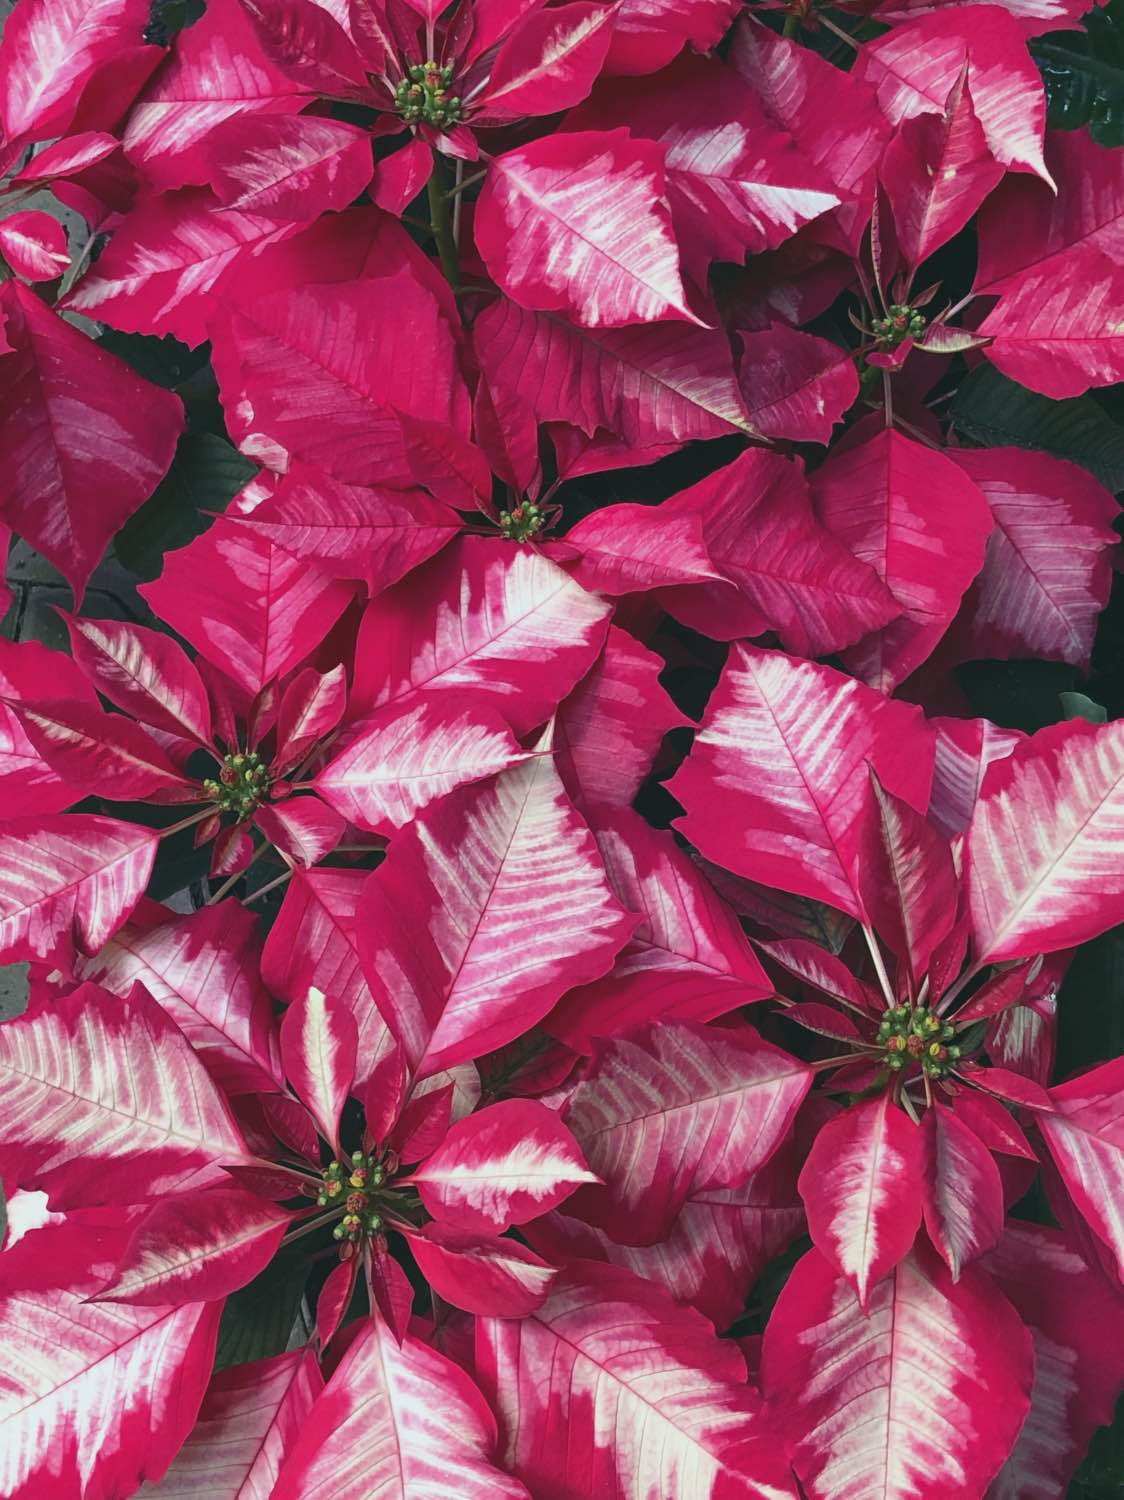 poinsettia care guide by pop shop america gardening tips